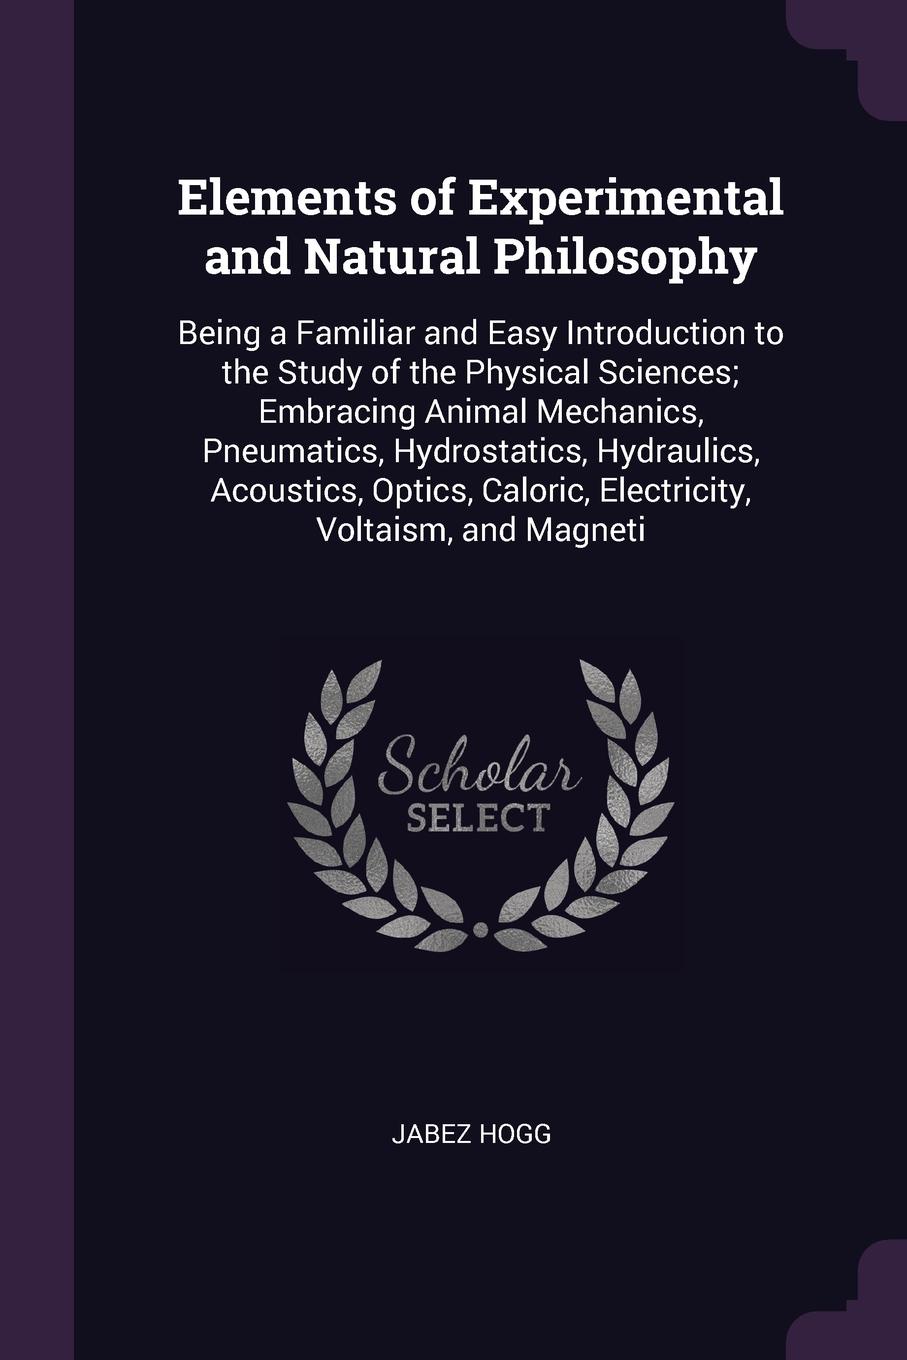 Elements of Experimental and Natural Philosophy. Being a Familiar and Easy Introduction to the Study of the Physical Sciences; Embracing Animal Mechanics, Pneumatics, Hydrostatics, Hydraulics, Acoustics, Optics, Caloric, Electricity, Voltaism, and...